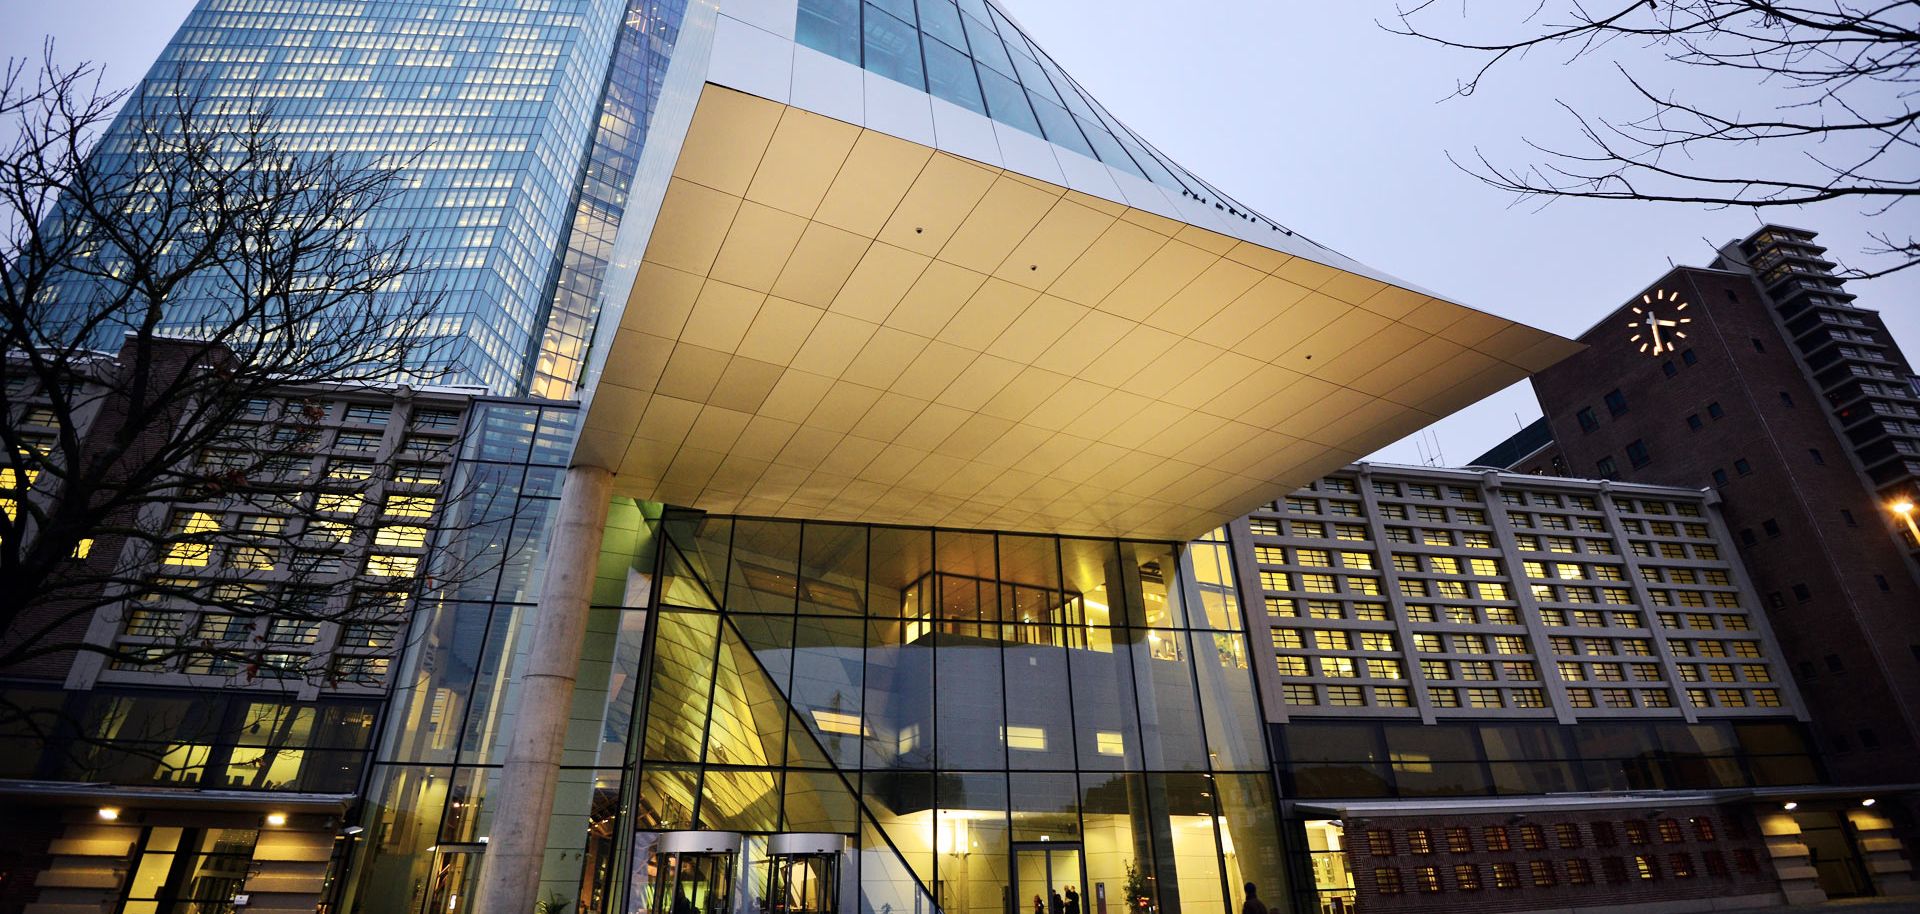 At the headquarters of the European Central Bank in Frankfurt, the bank's officials are mulling changes to its bond-buying regimen, which supports its quantitative easing program.